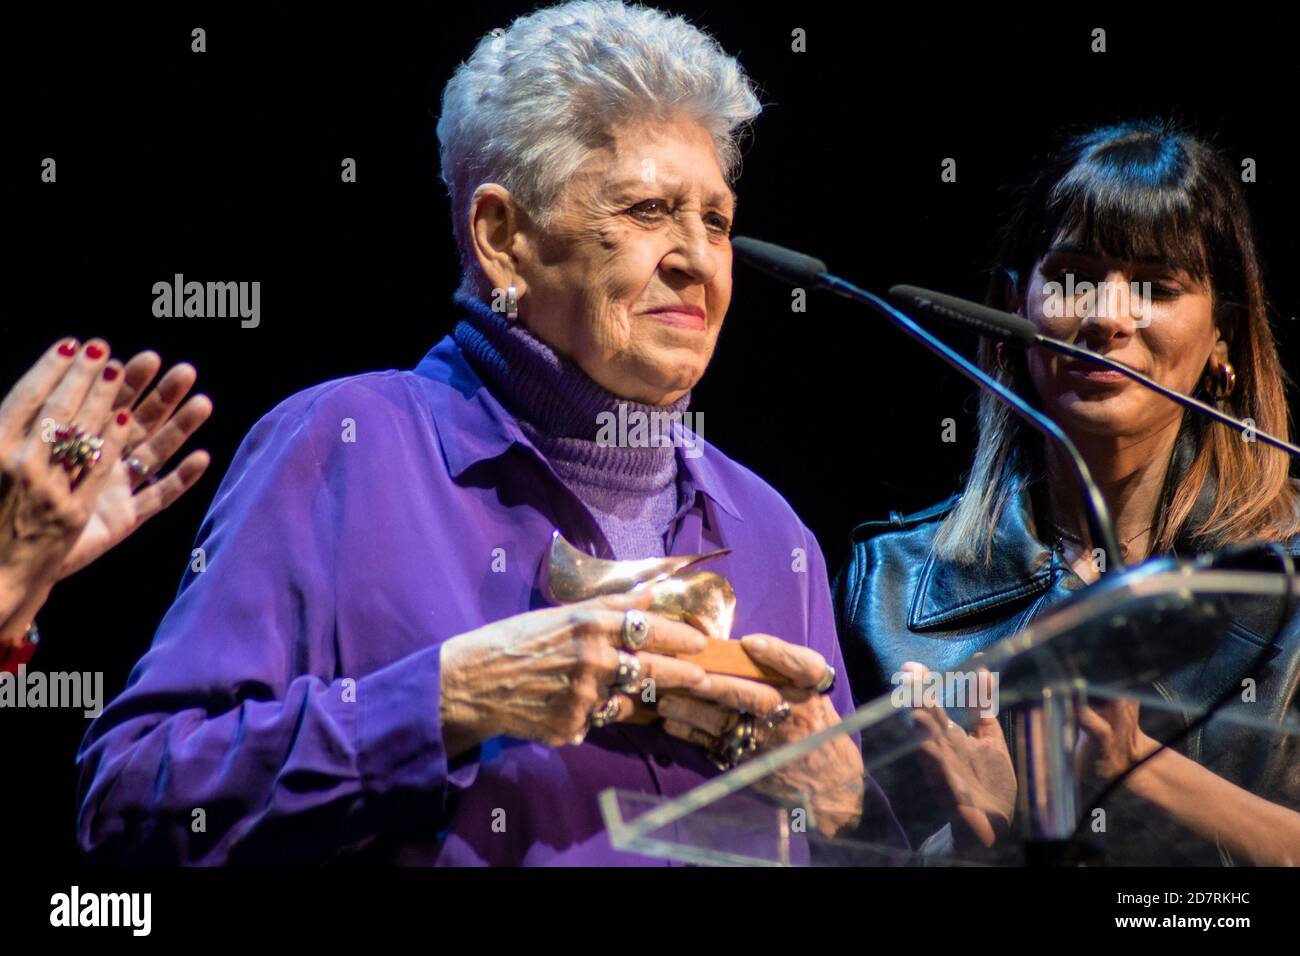 Pilar Bardem receives her award from 'Union de Actores' Awards 2020 at Teatro Circo Price in Madrid, Spain.March 09, 2020. (Oscar Gil / Alfa Images) Stock Photo